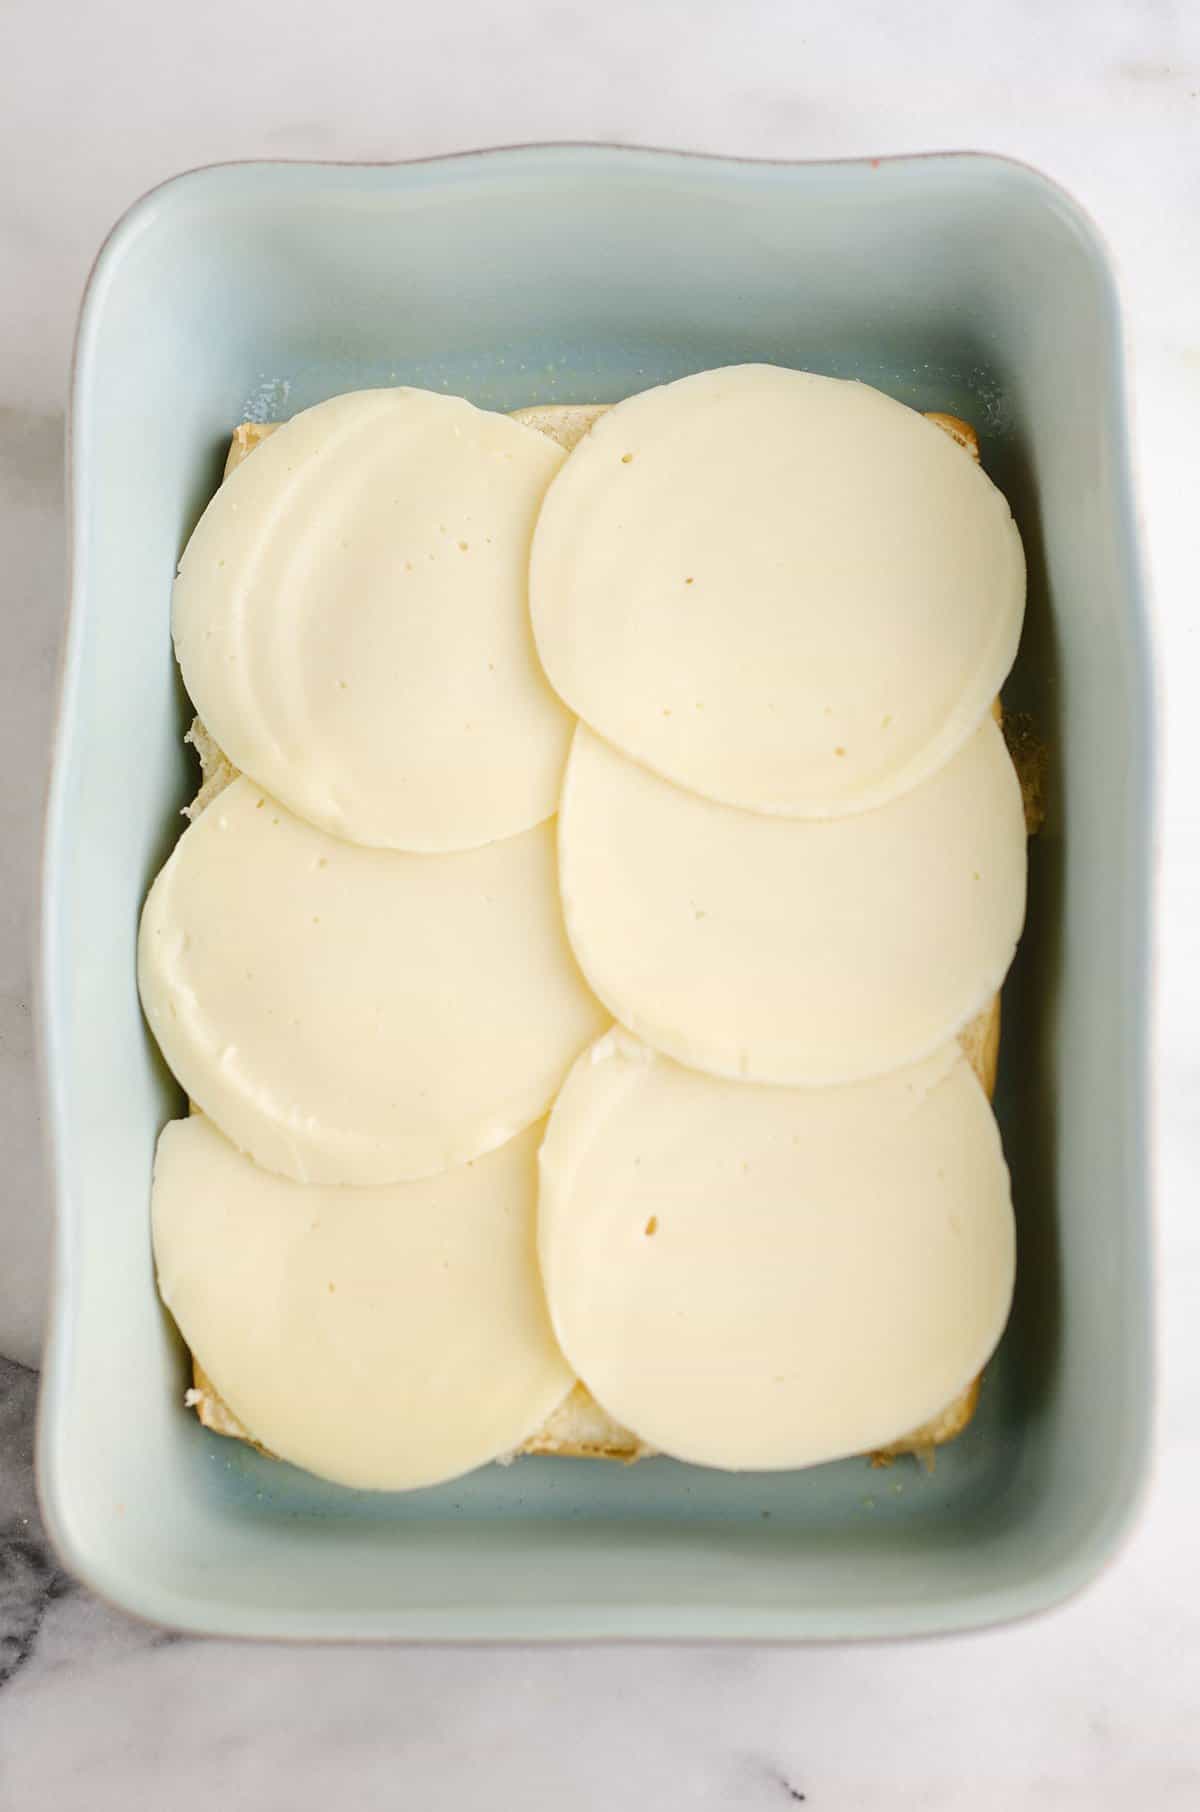 provolone cheese over buns in blue pan